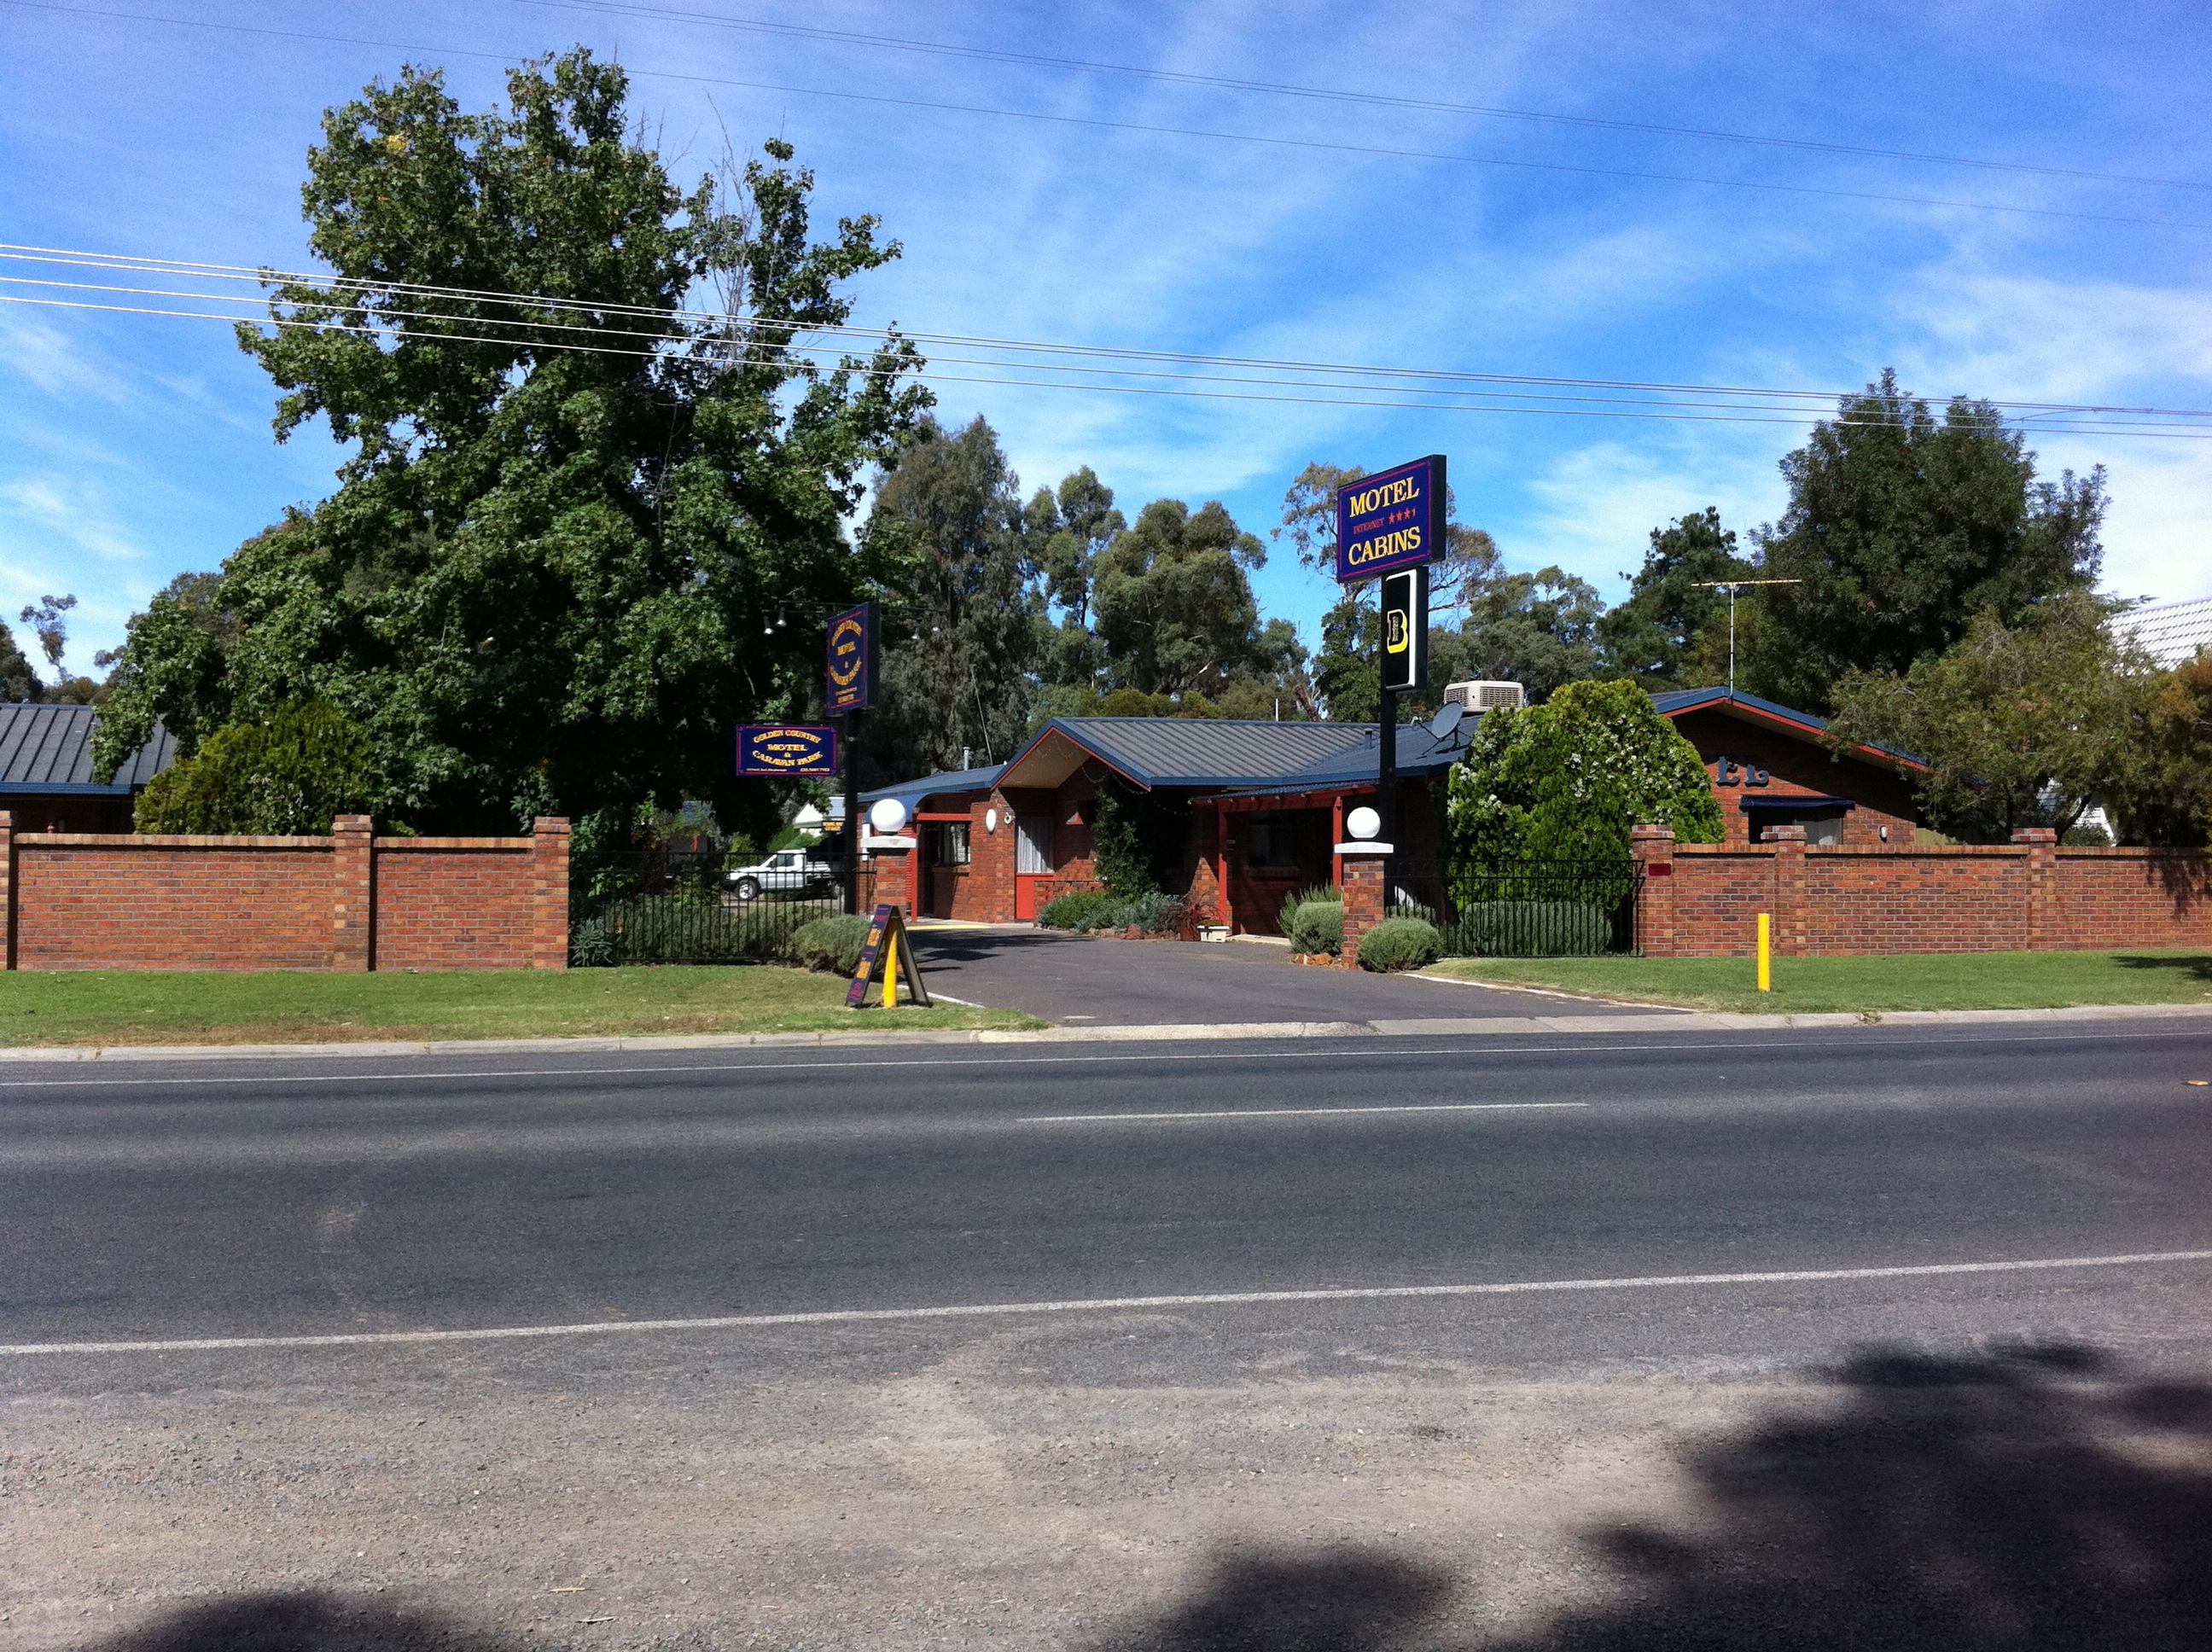 Golden Country Motel and Caravan Park - Maryborough: Park and motel entrance